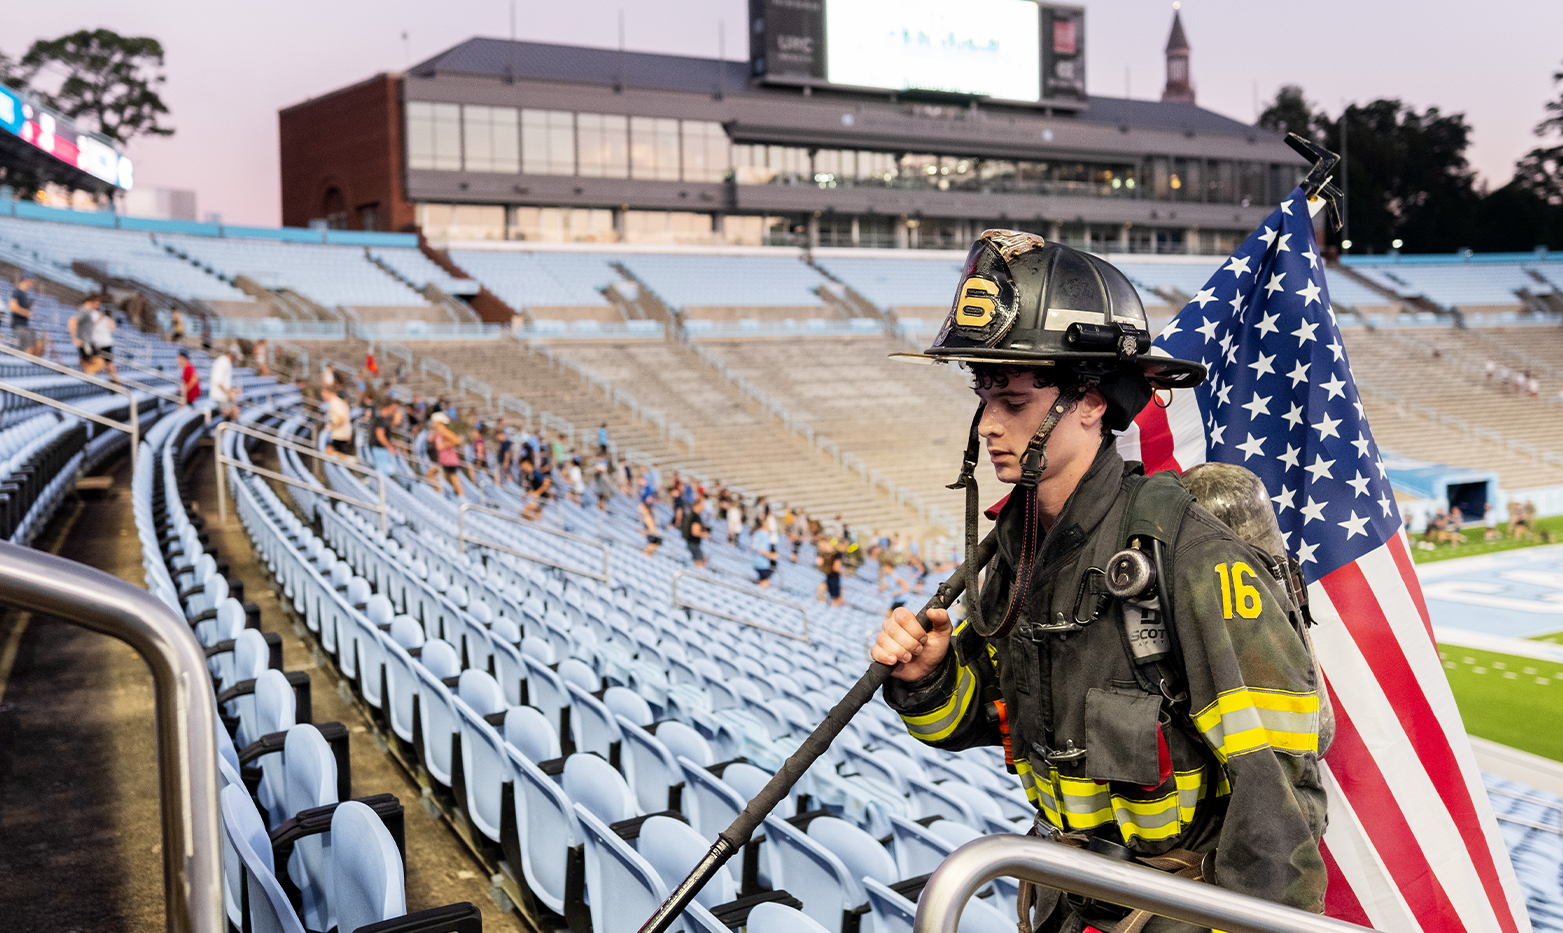 A firefighter holding an American flag and running up stadium steps.